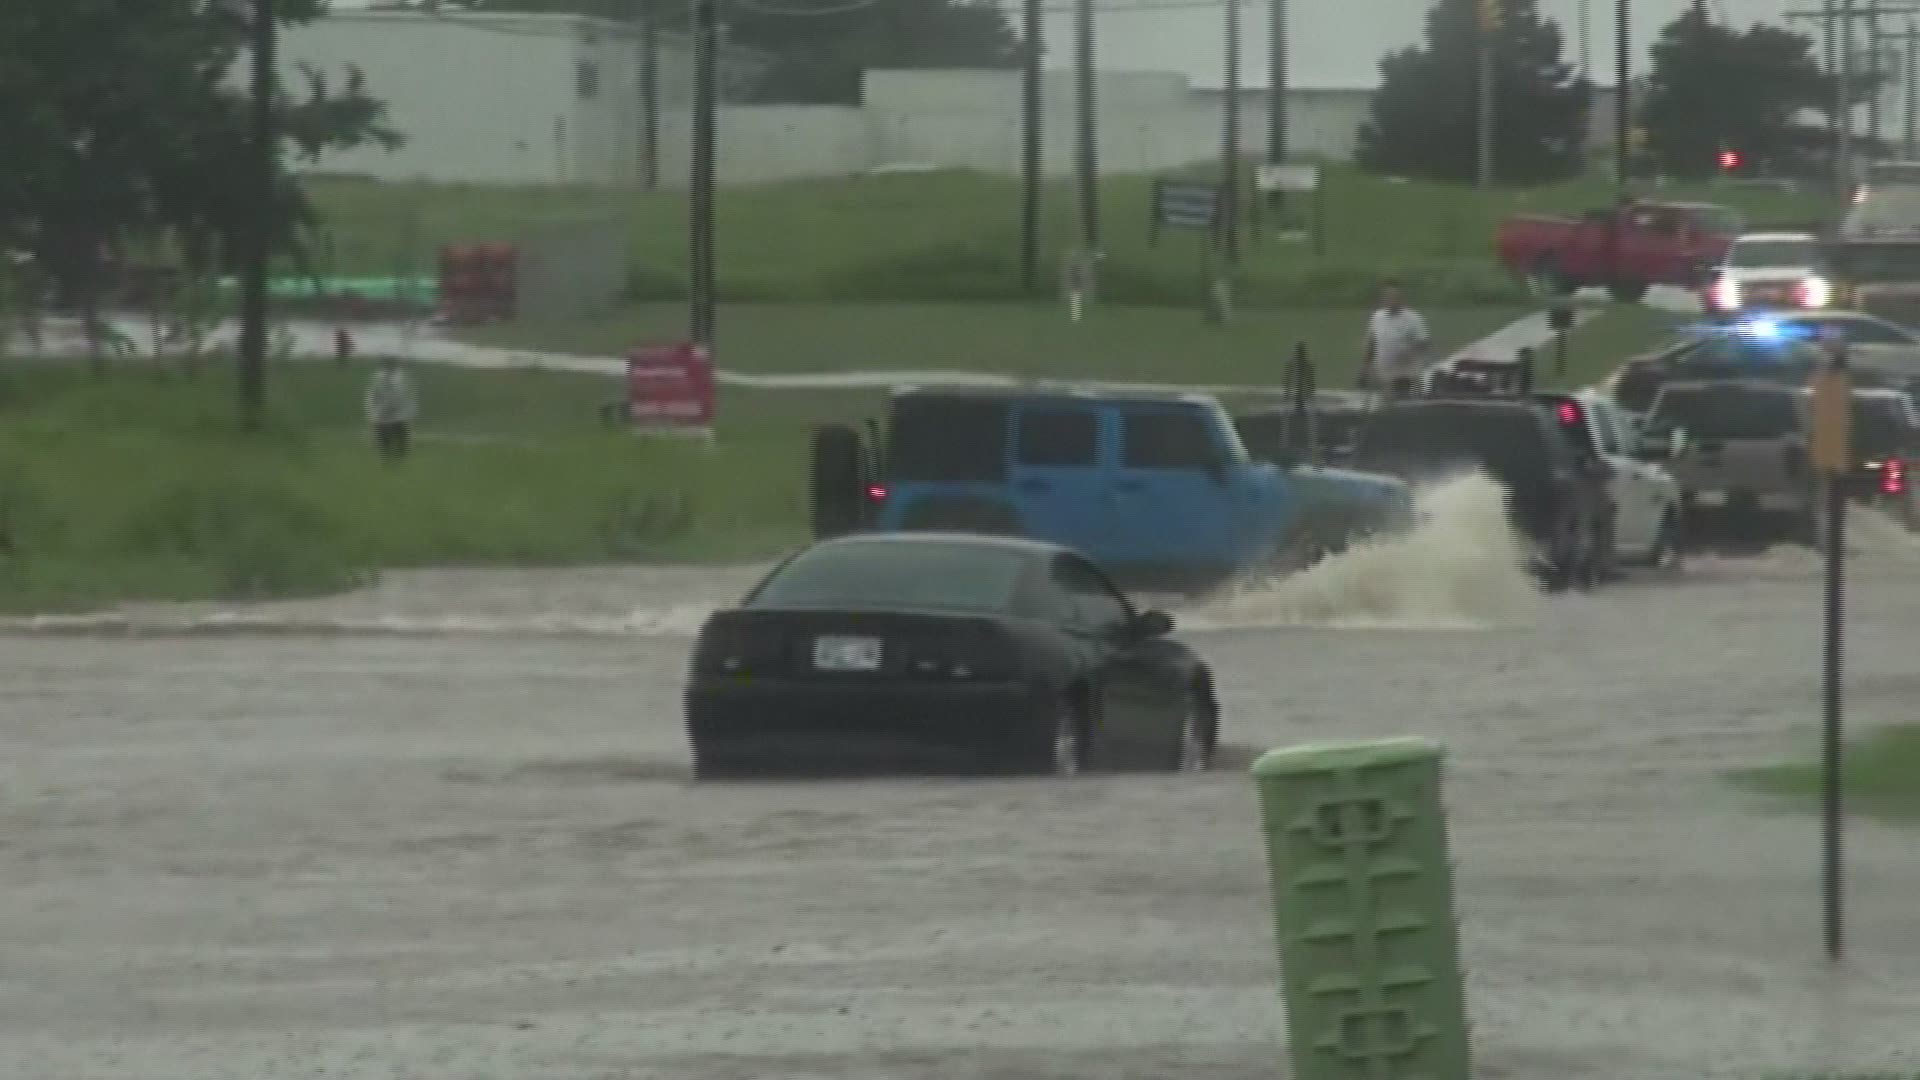 Storm-weary Oklahoma and Arkansas are seeing another round of severe weather that has flooded roadways.